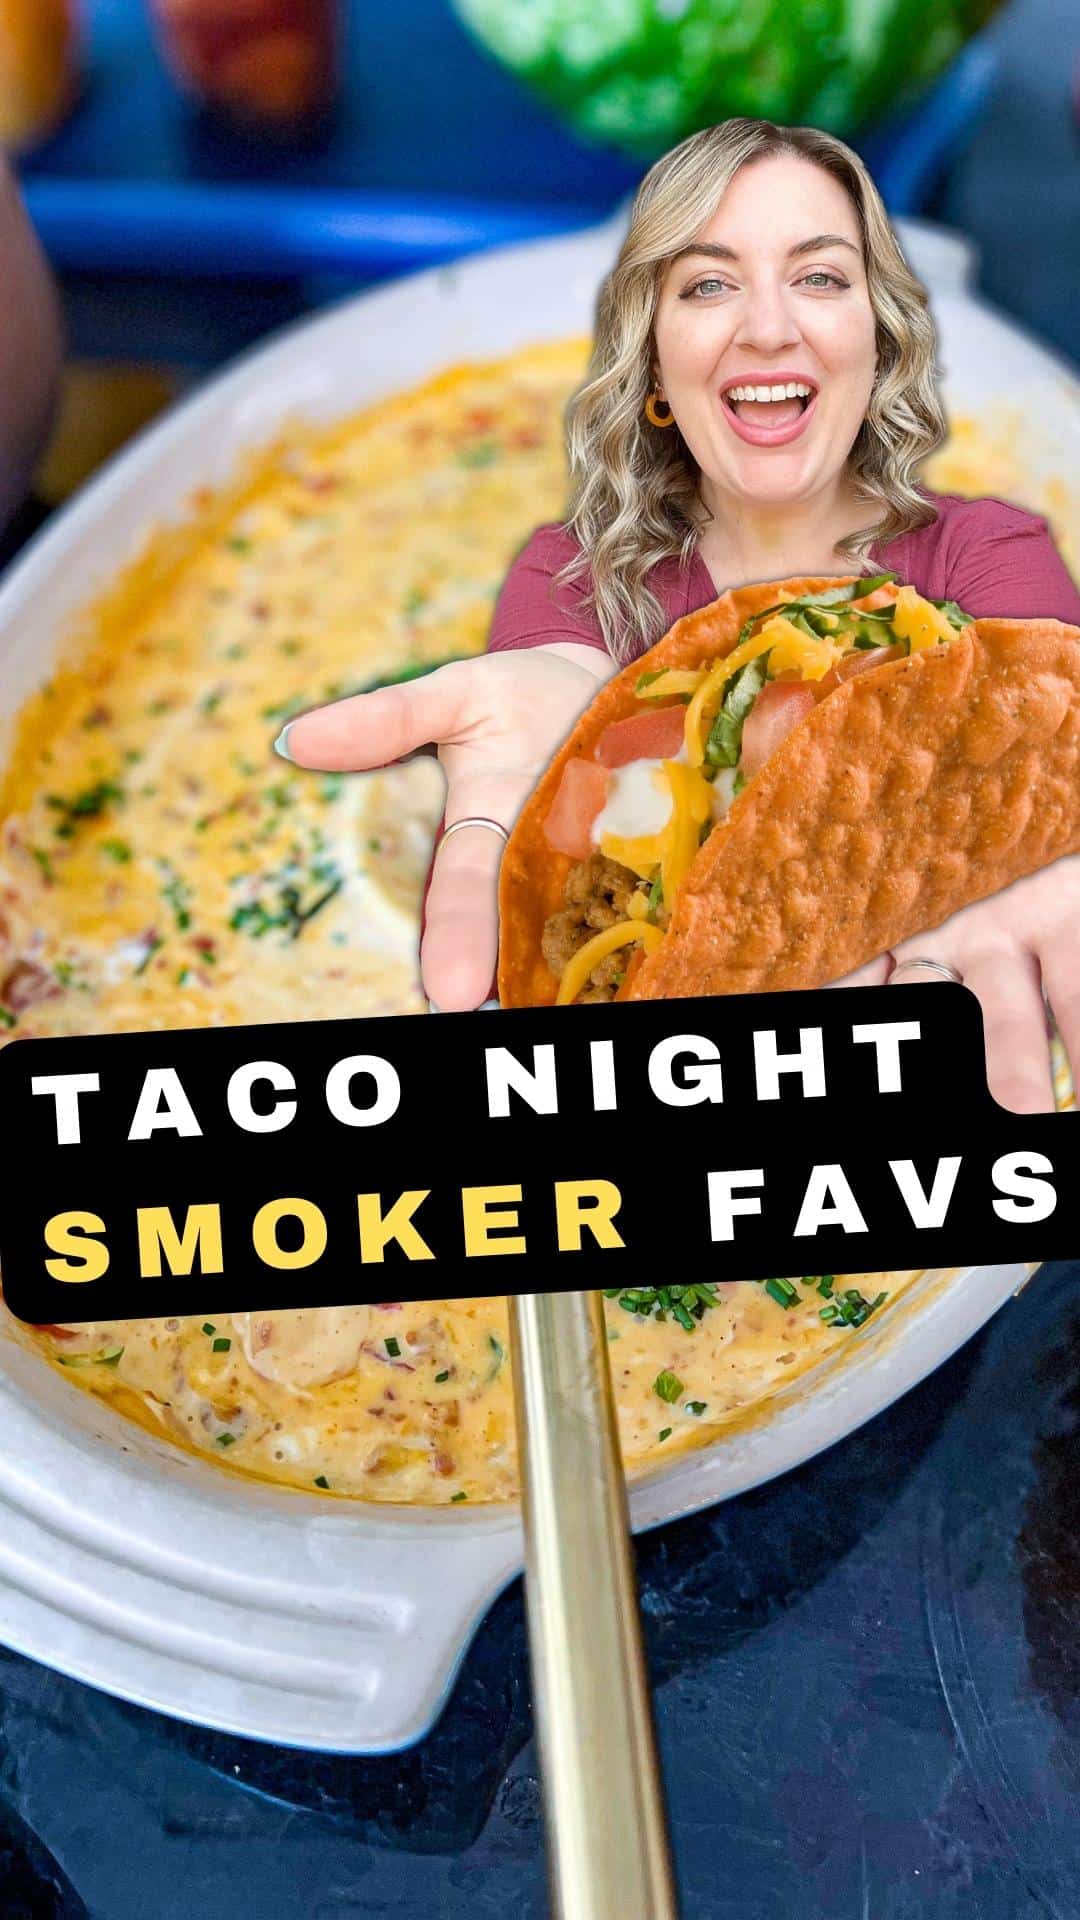 smoked queso appetizer dip for taco night using the Traeger pellet grill with text overlay and Jenna Passaro from Sip Bite Go